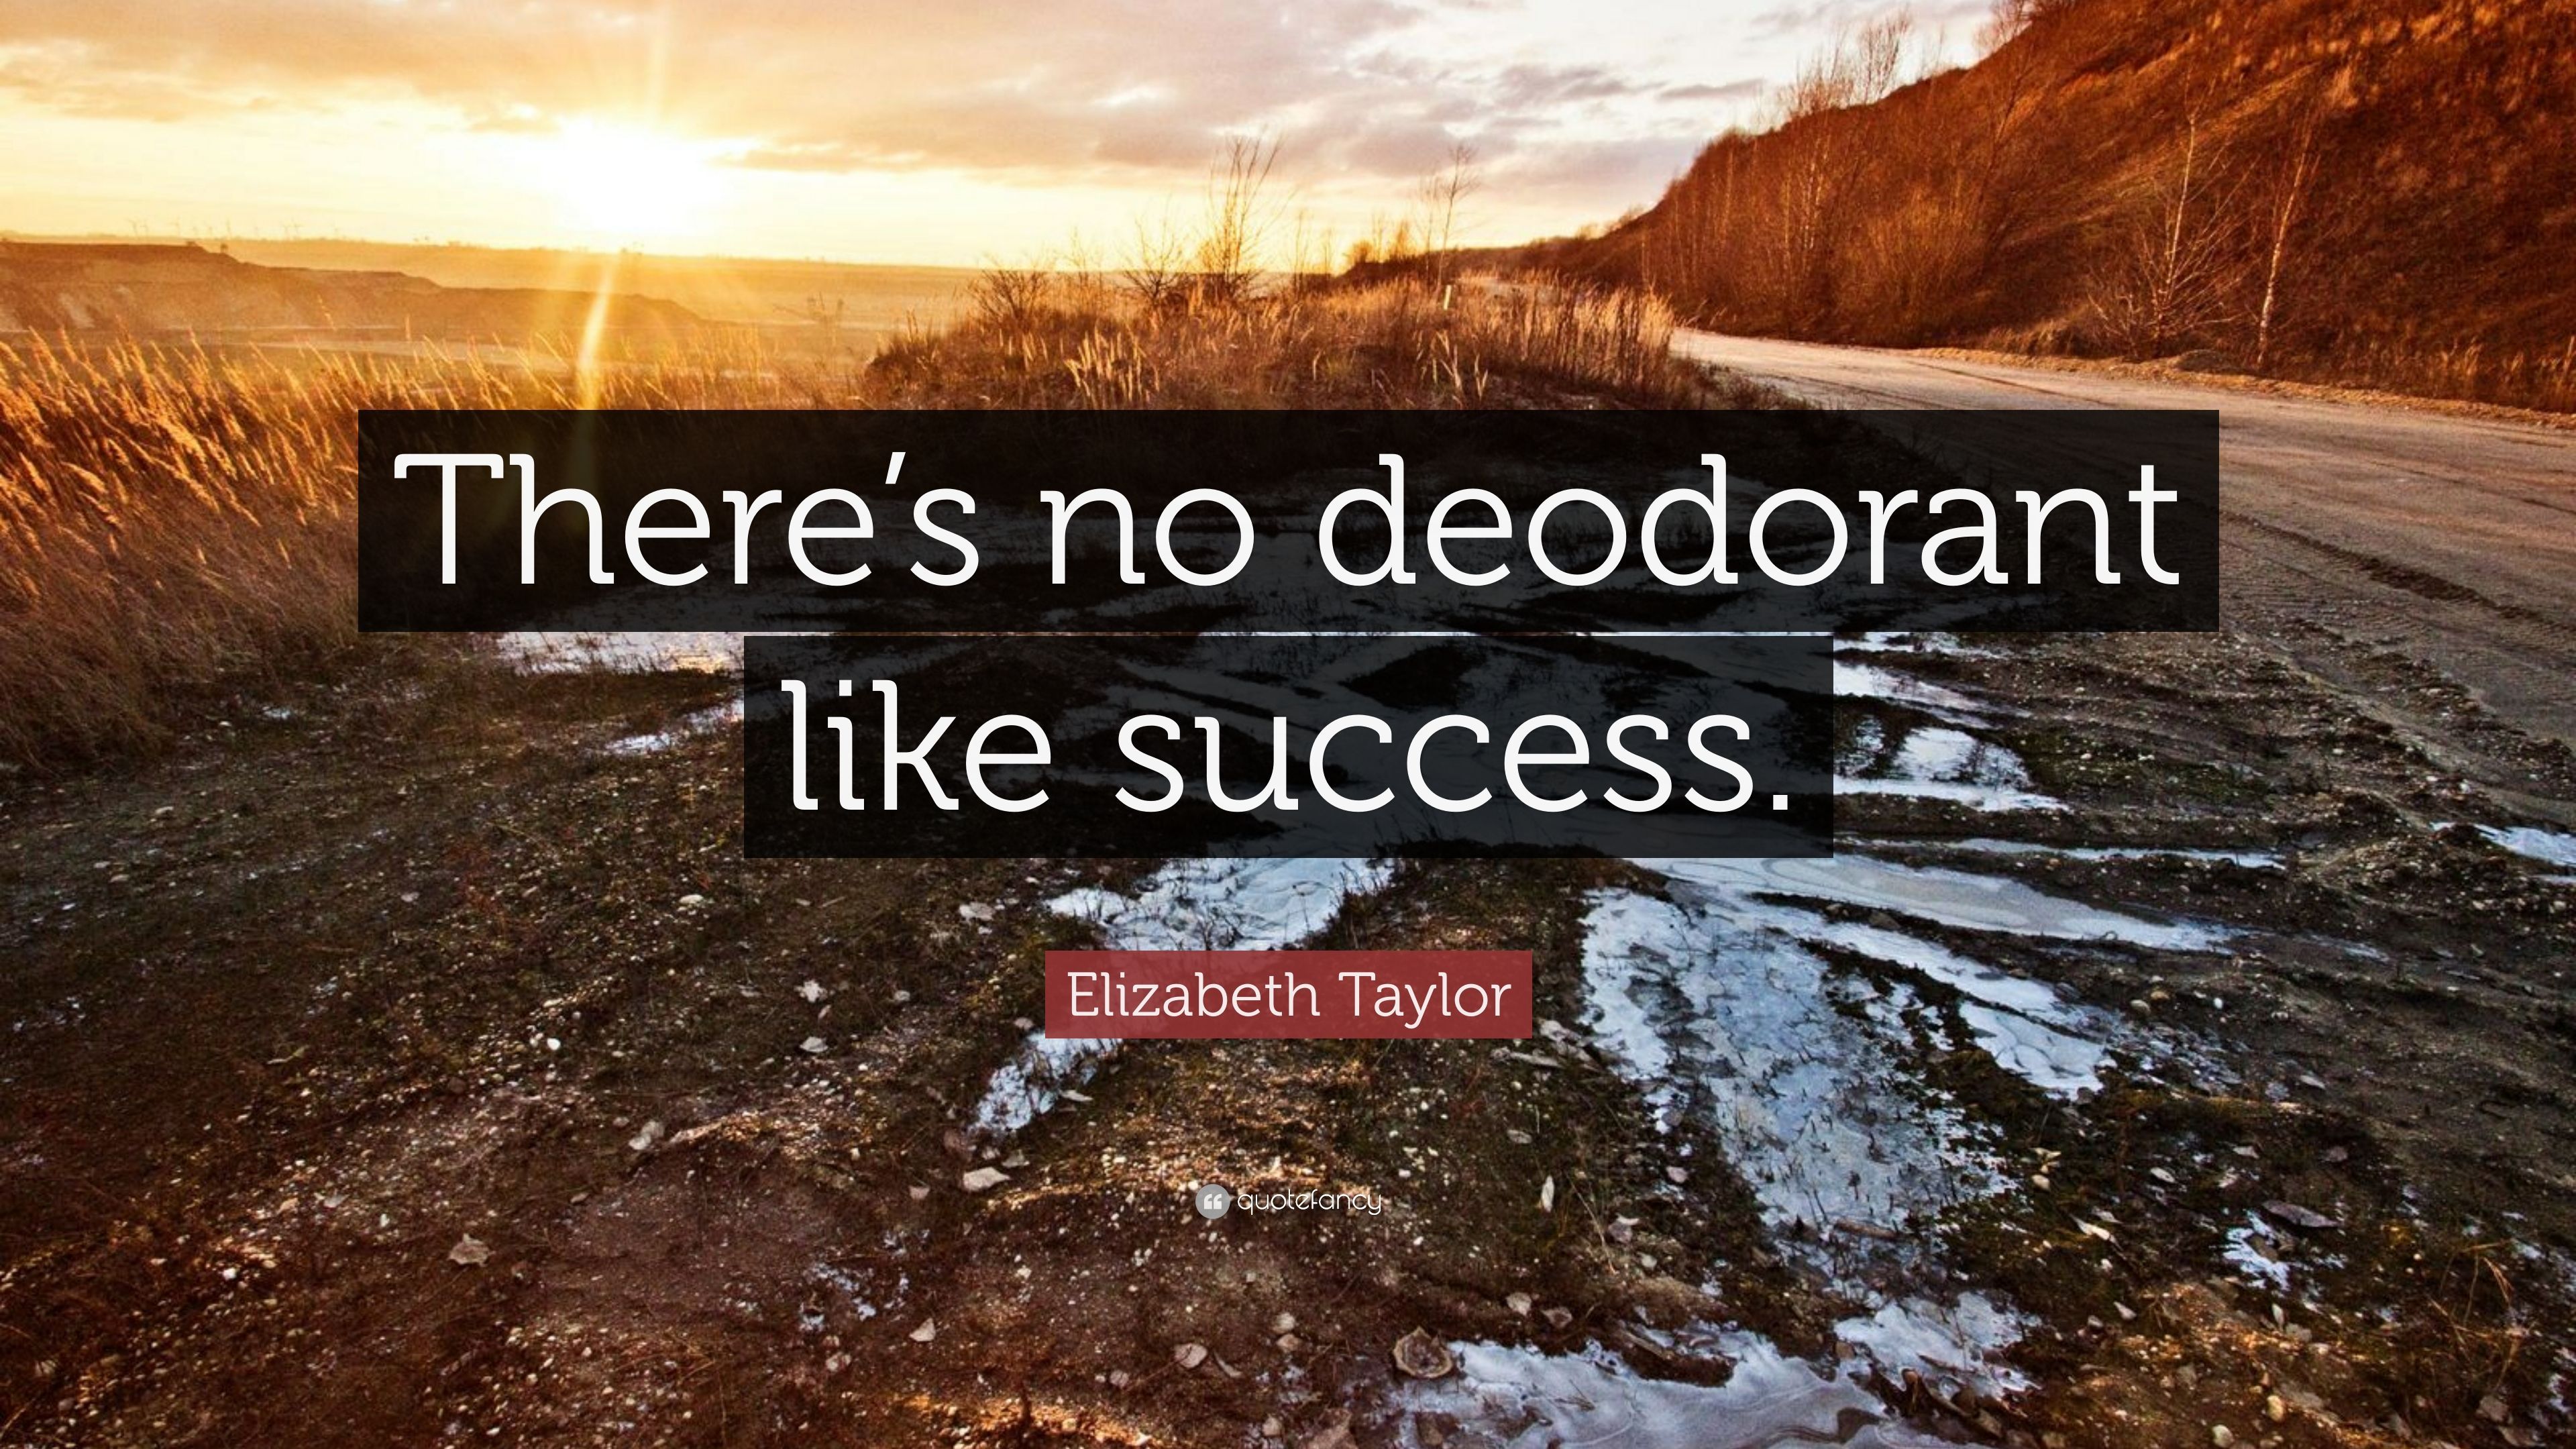 Elizabeth Taylor Quote: “There's no deodorant like success.” 7